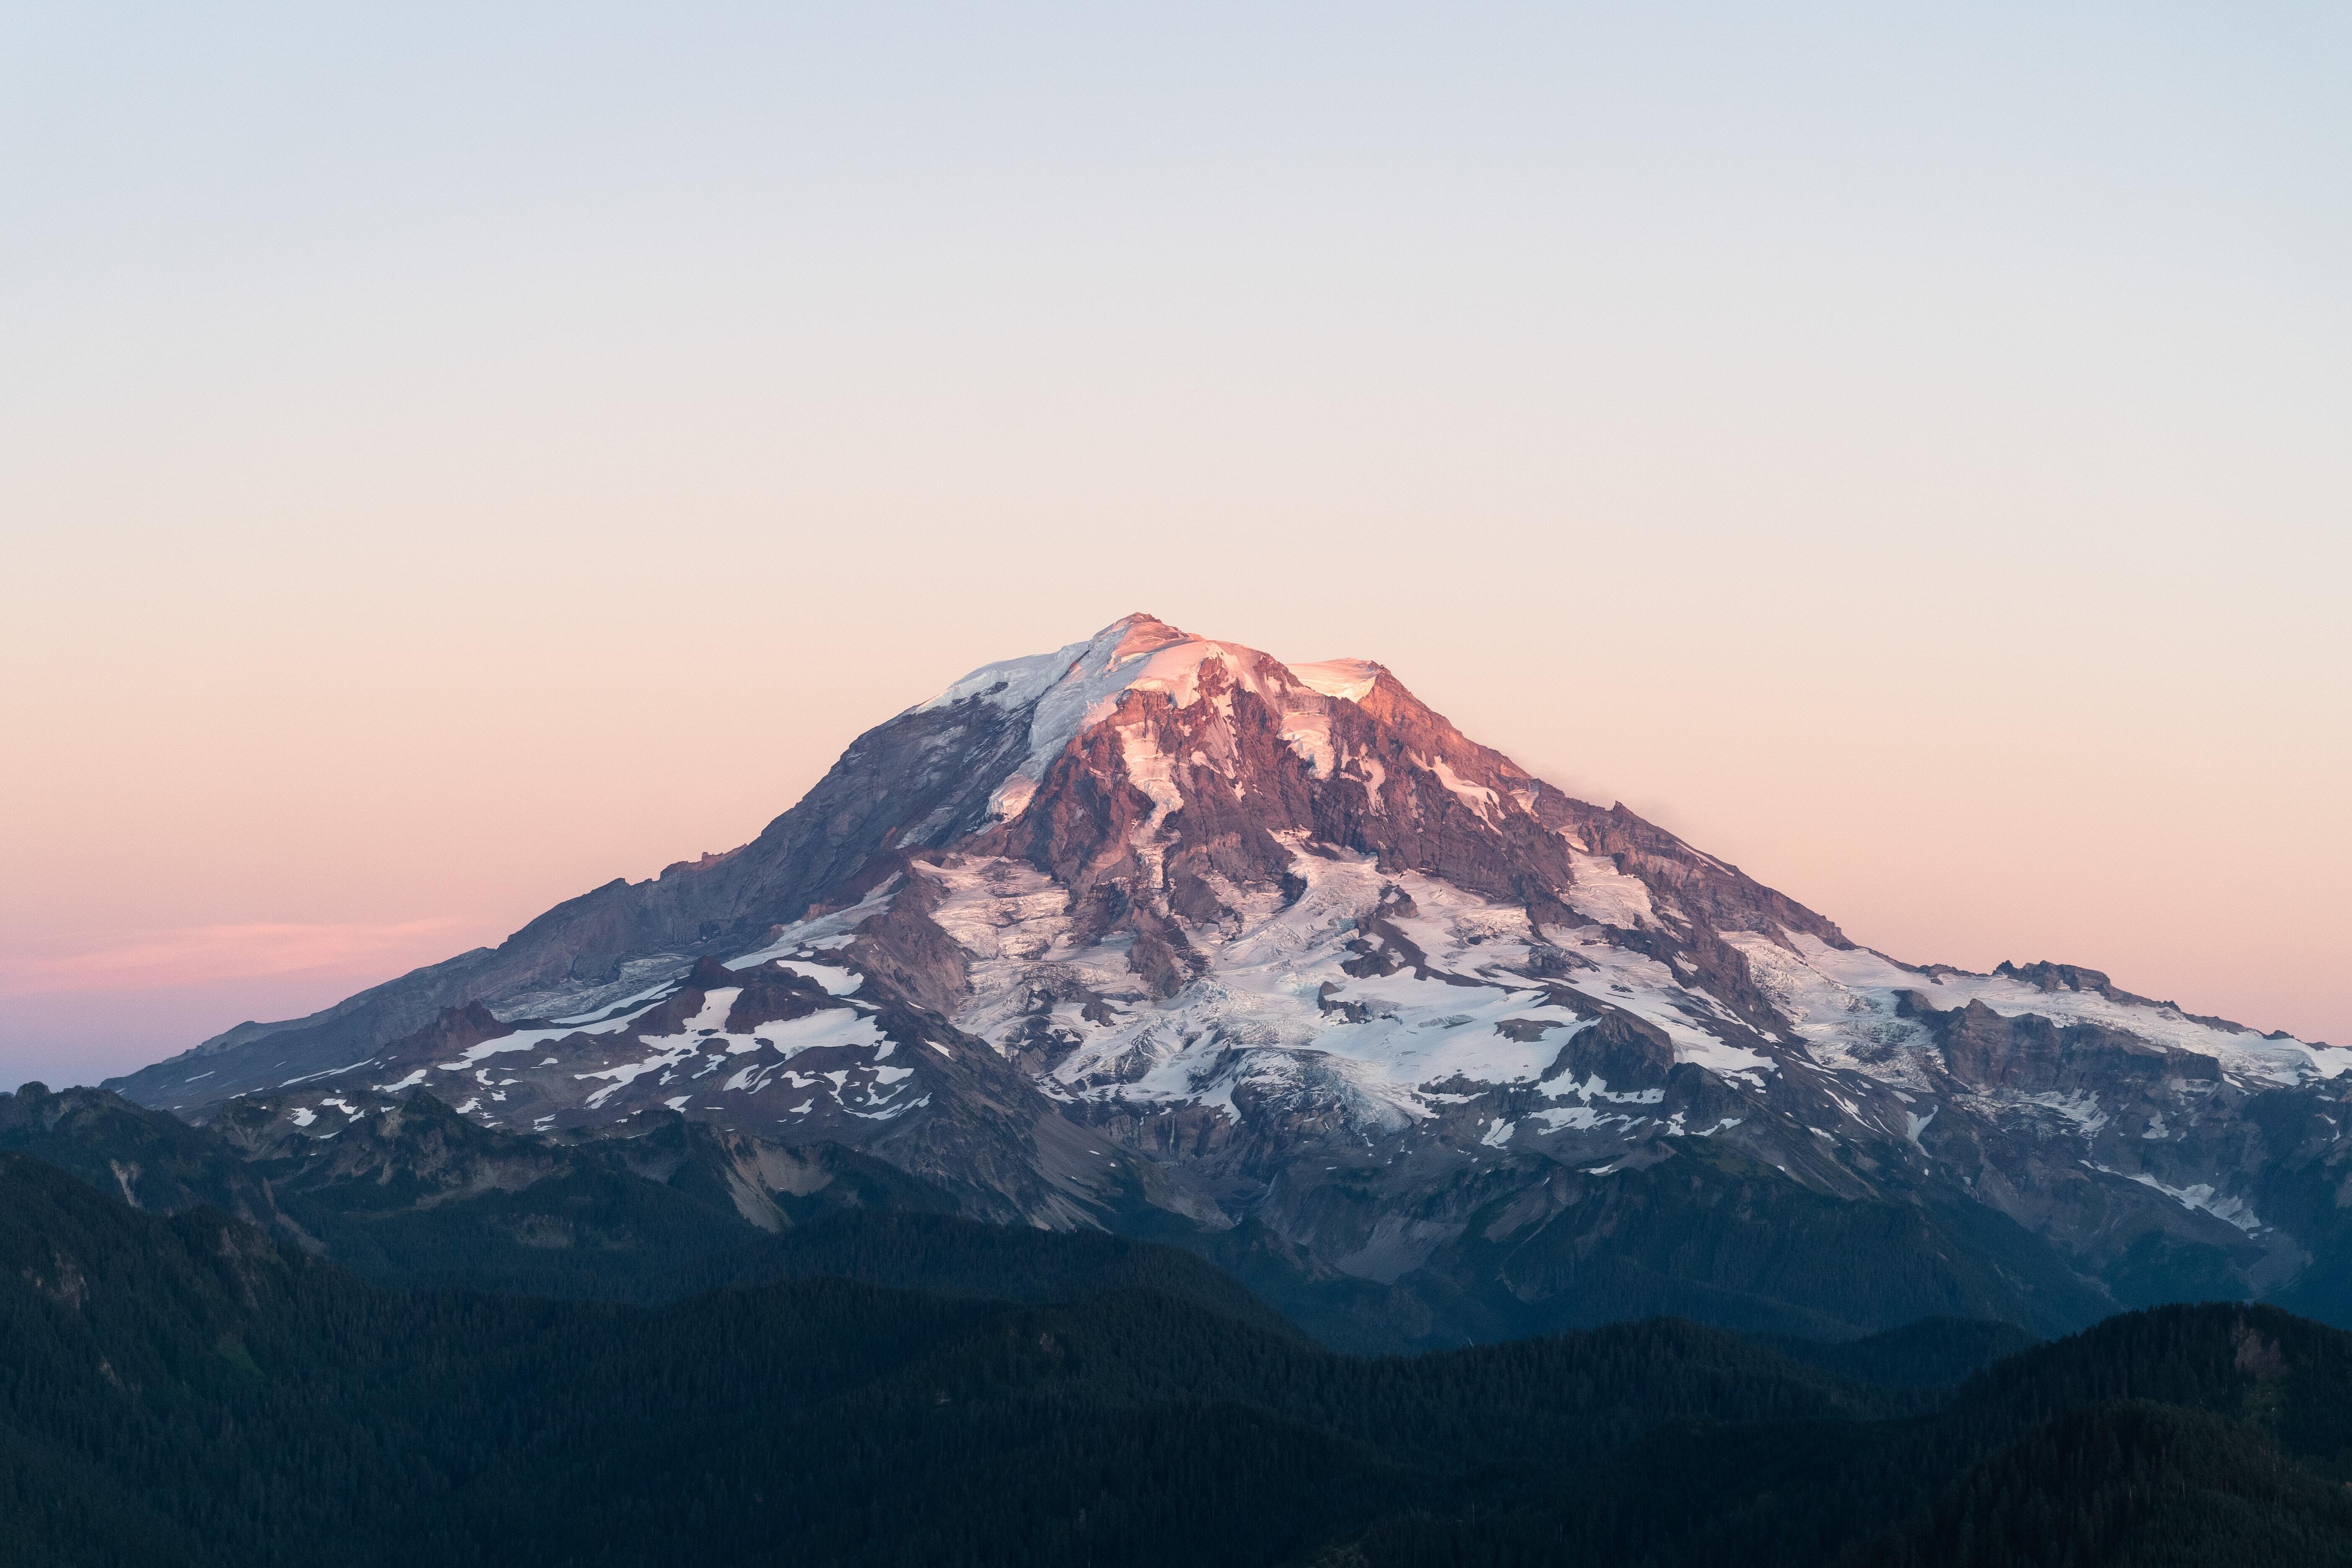 A sunset image of Rainier in the summer with patches of snow still visible